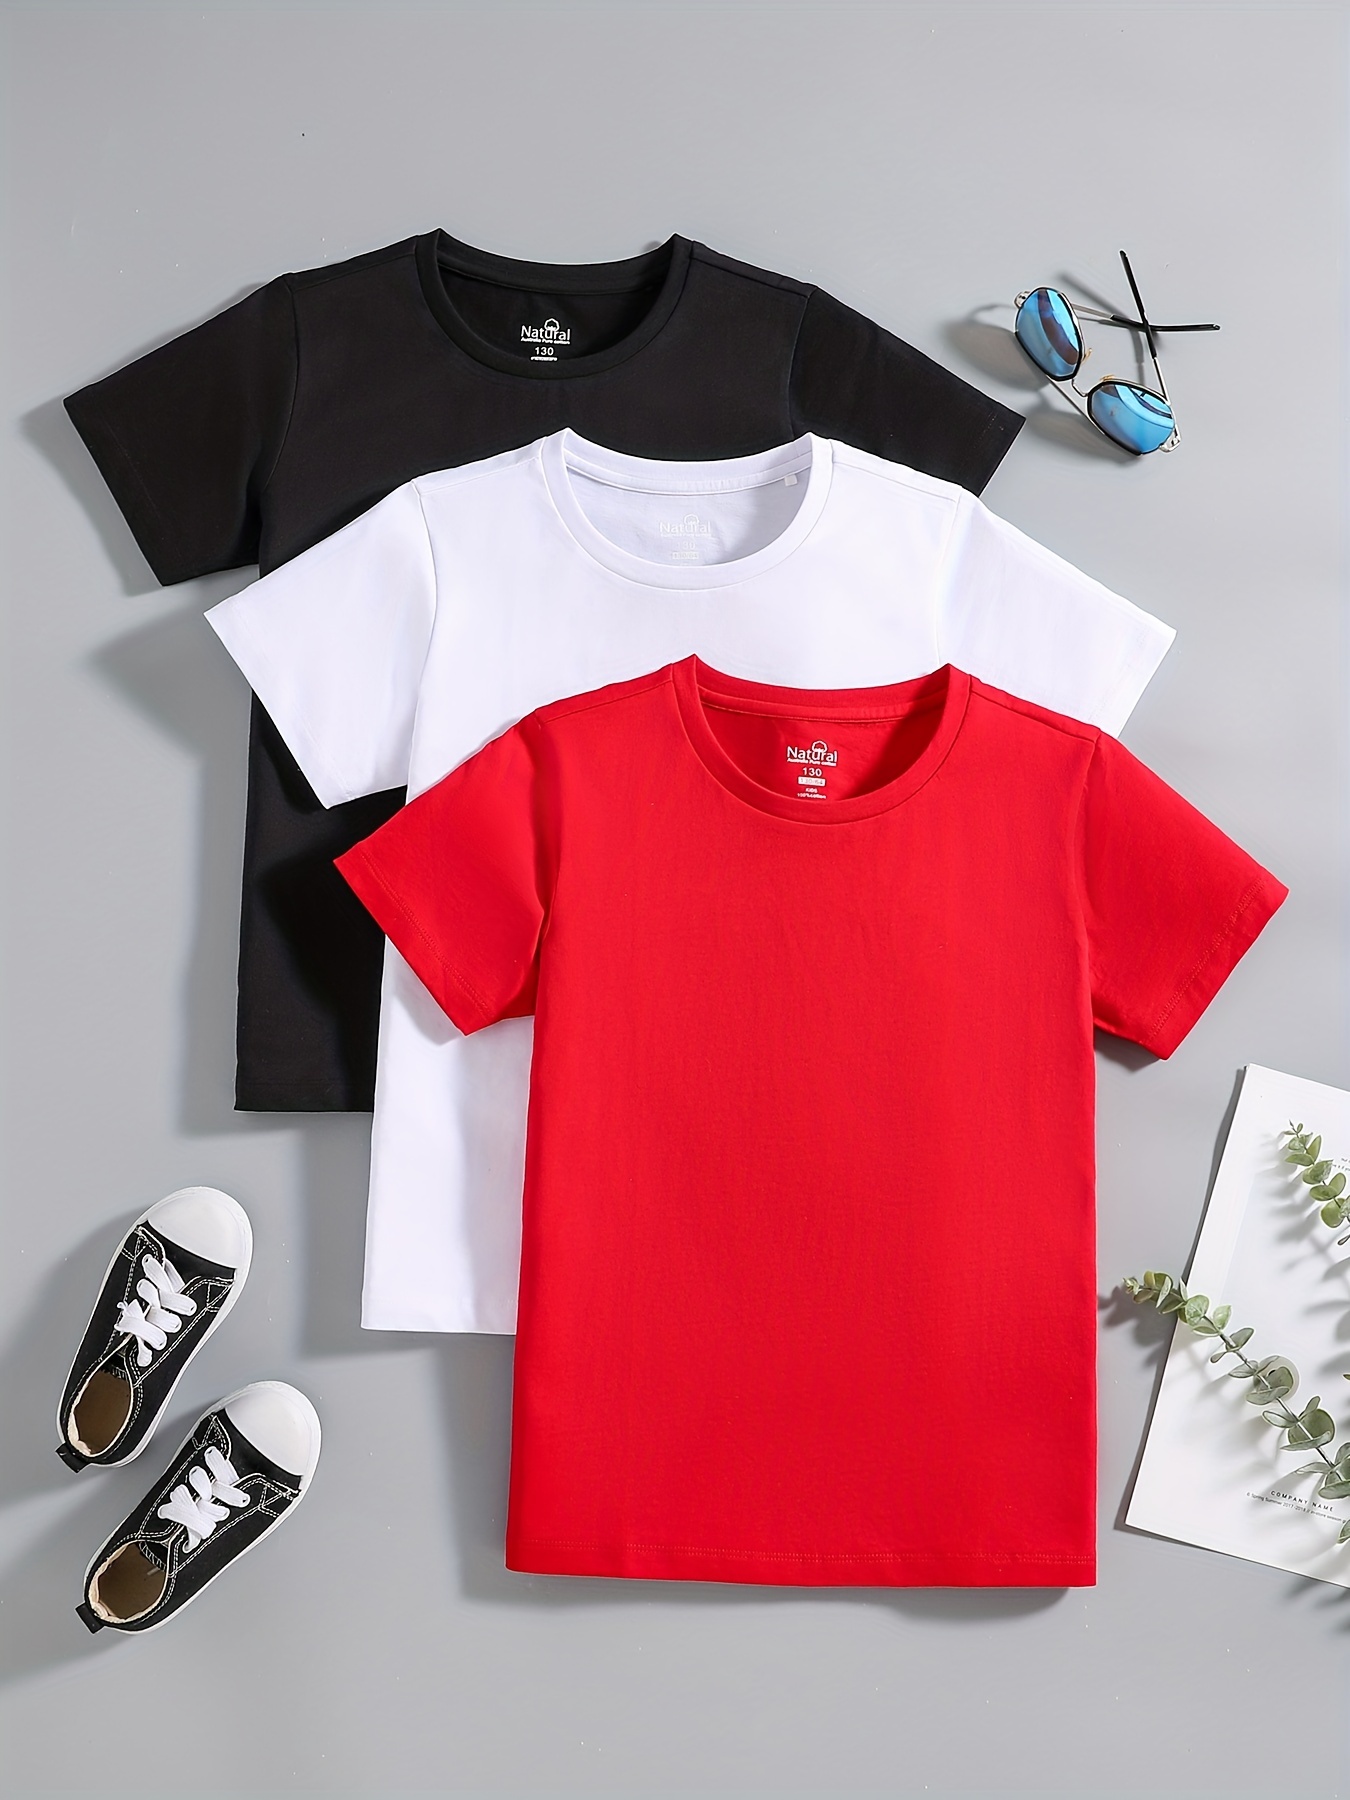 3pcs Boys Solid Creative T-shirt, Casual Lightweight Comfy Short Sleeve Tee Tops, Kids Clothings For Summer